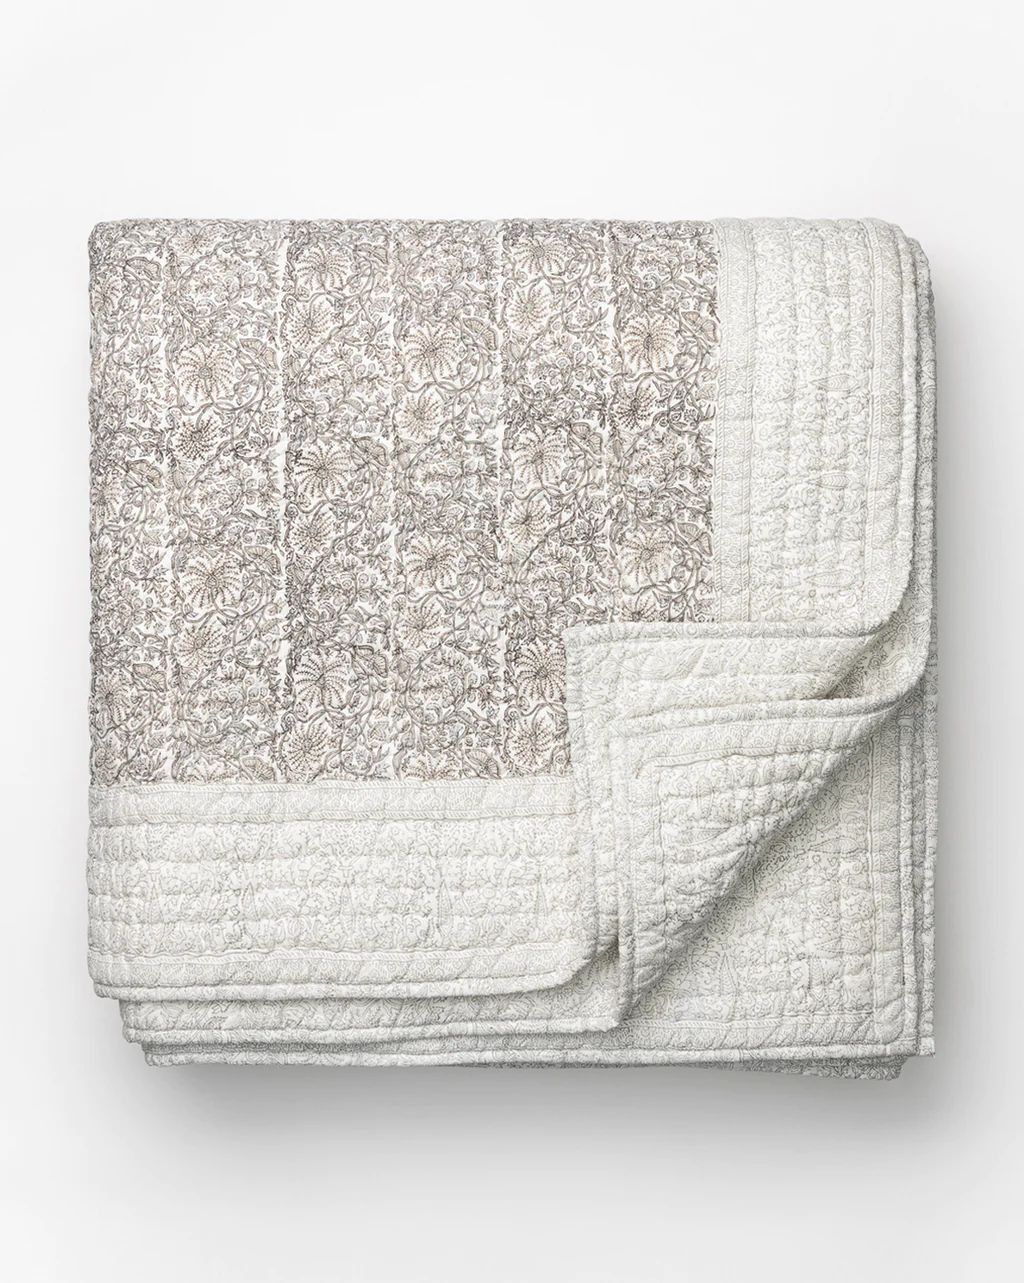 Floral Block Print Quilt | McGee & Co.